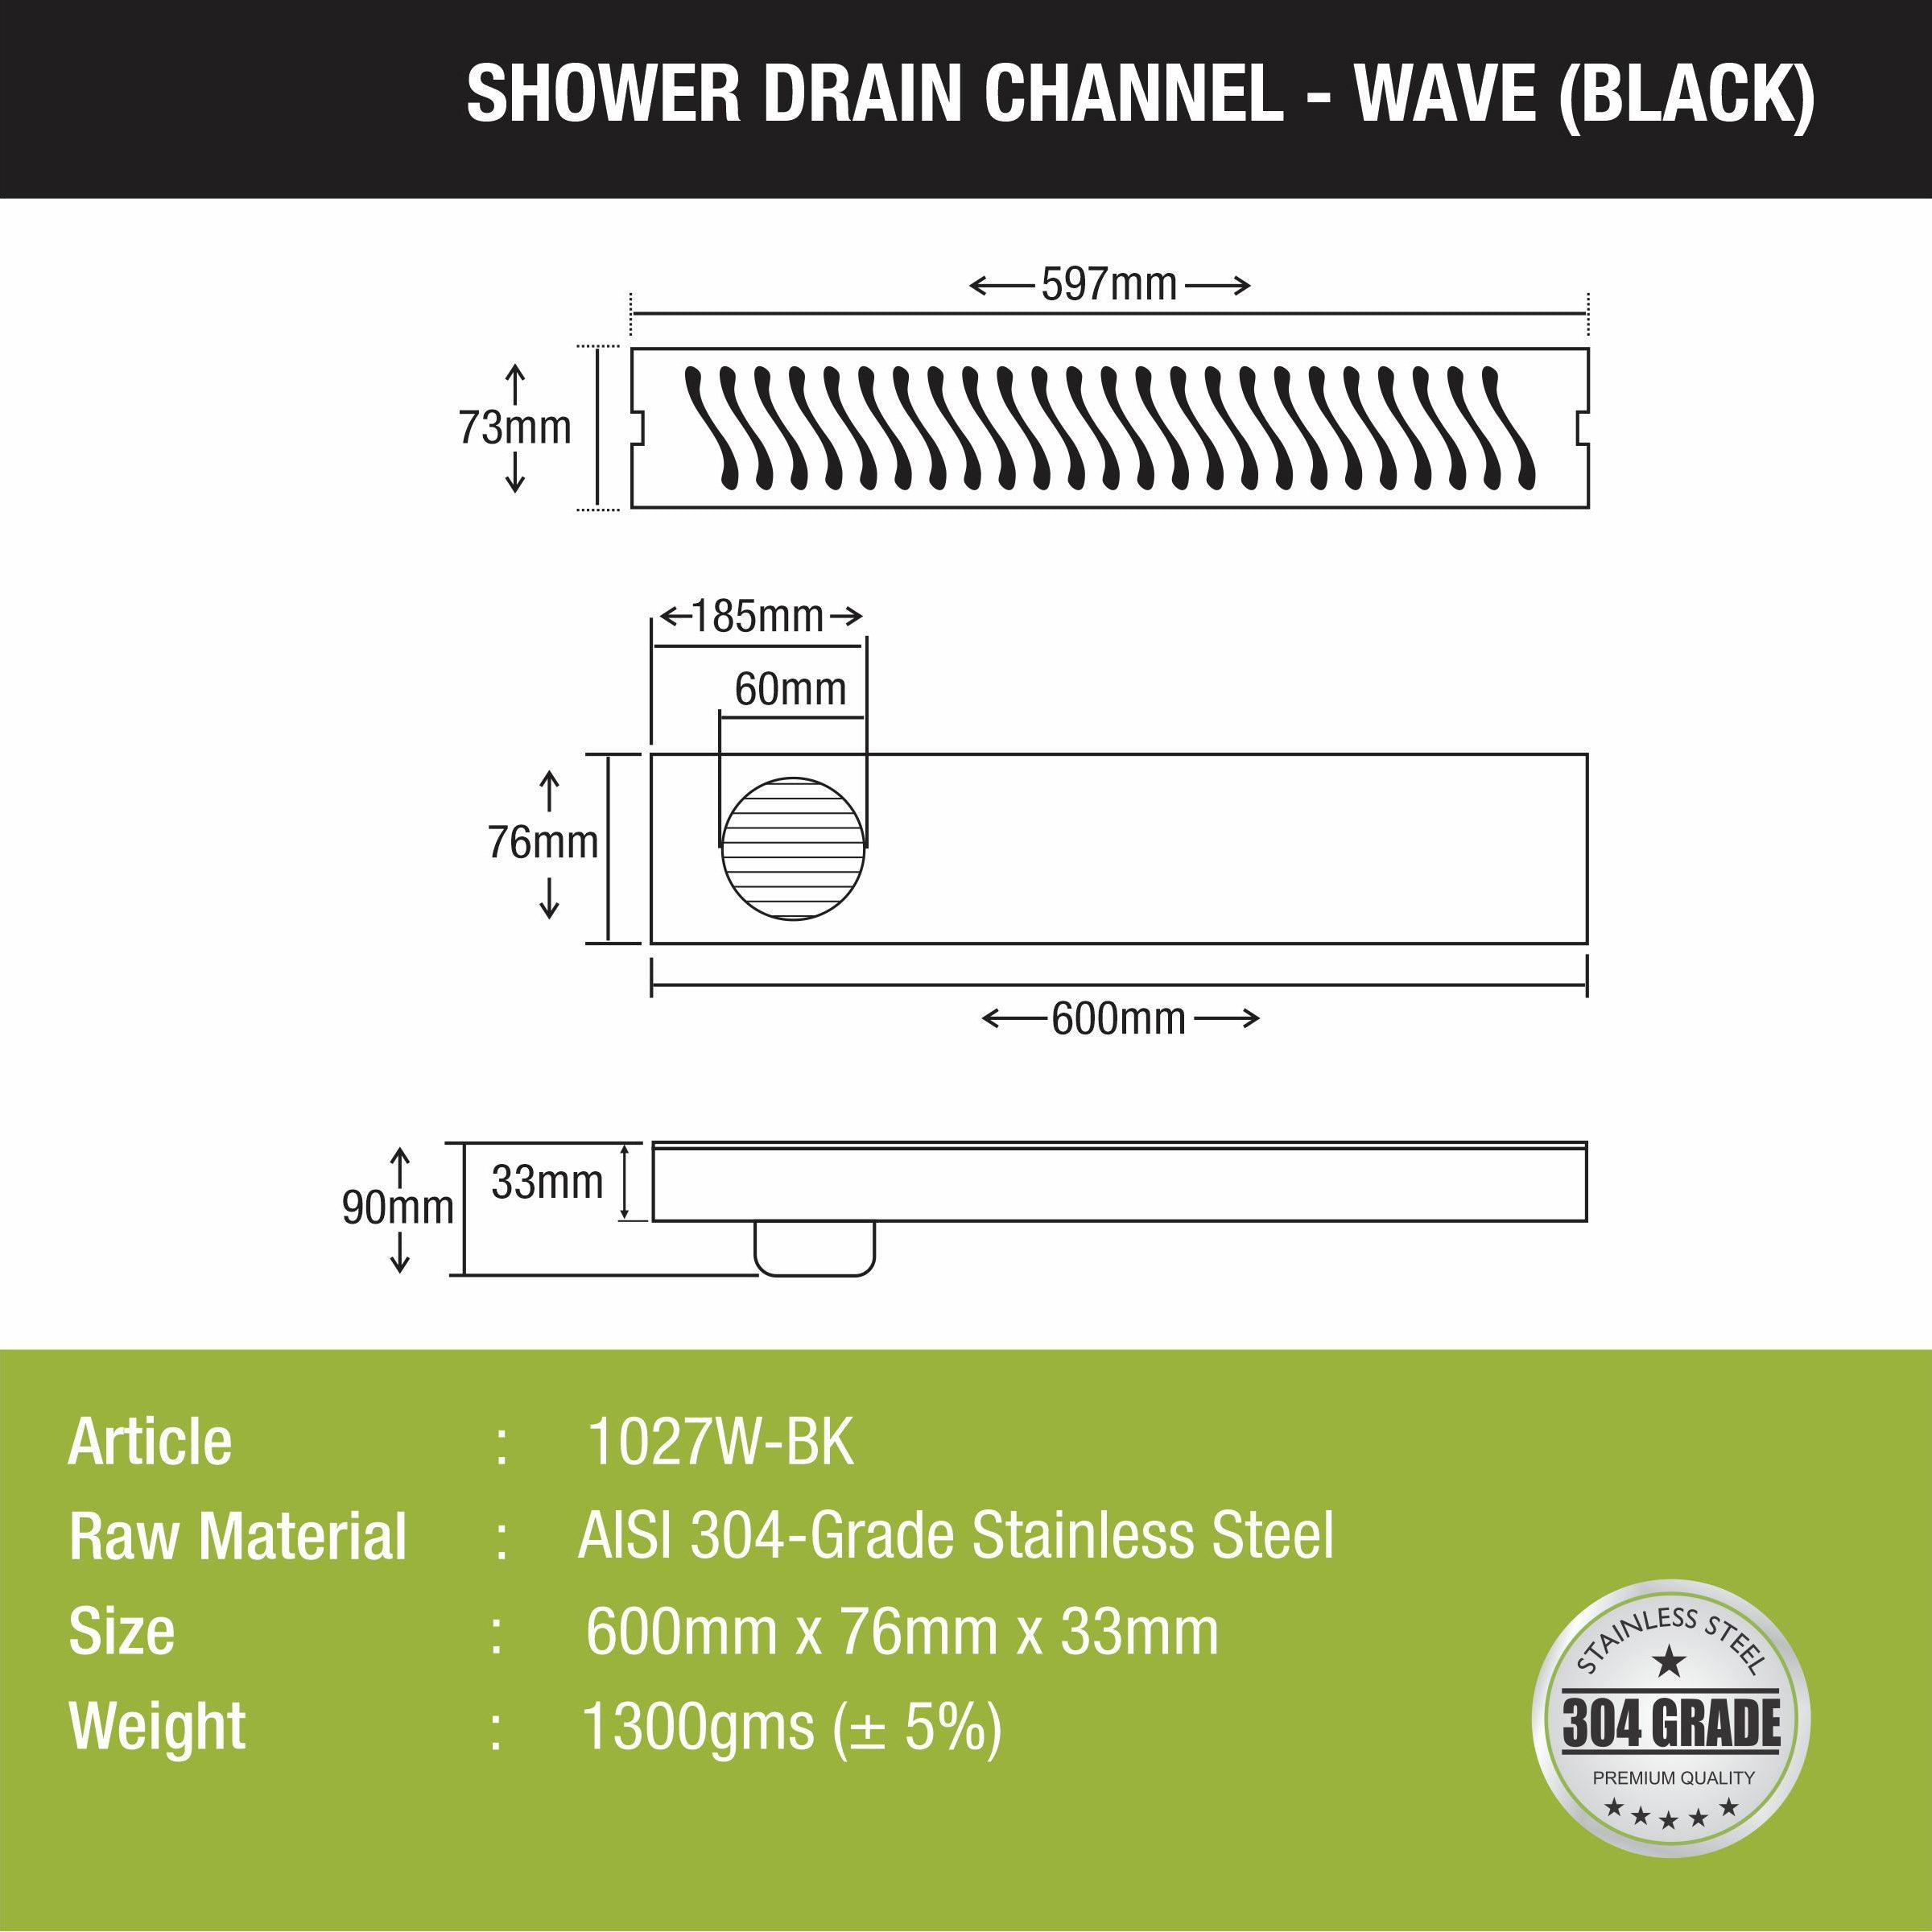 Wave Shower Drain Channel - Black (24 x 3 Inches) size and measurement